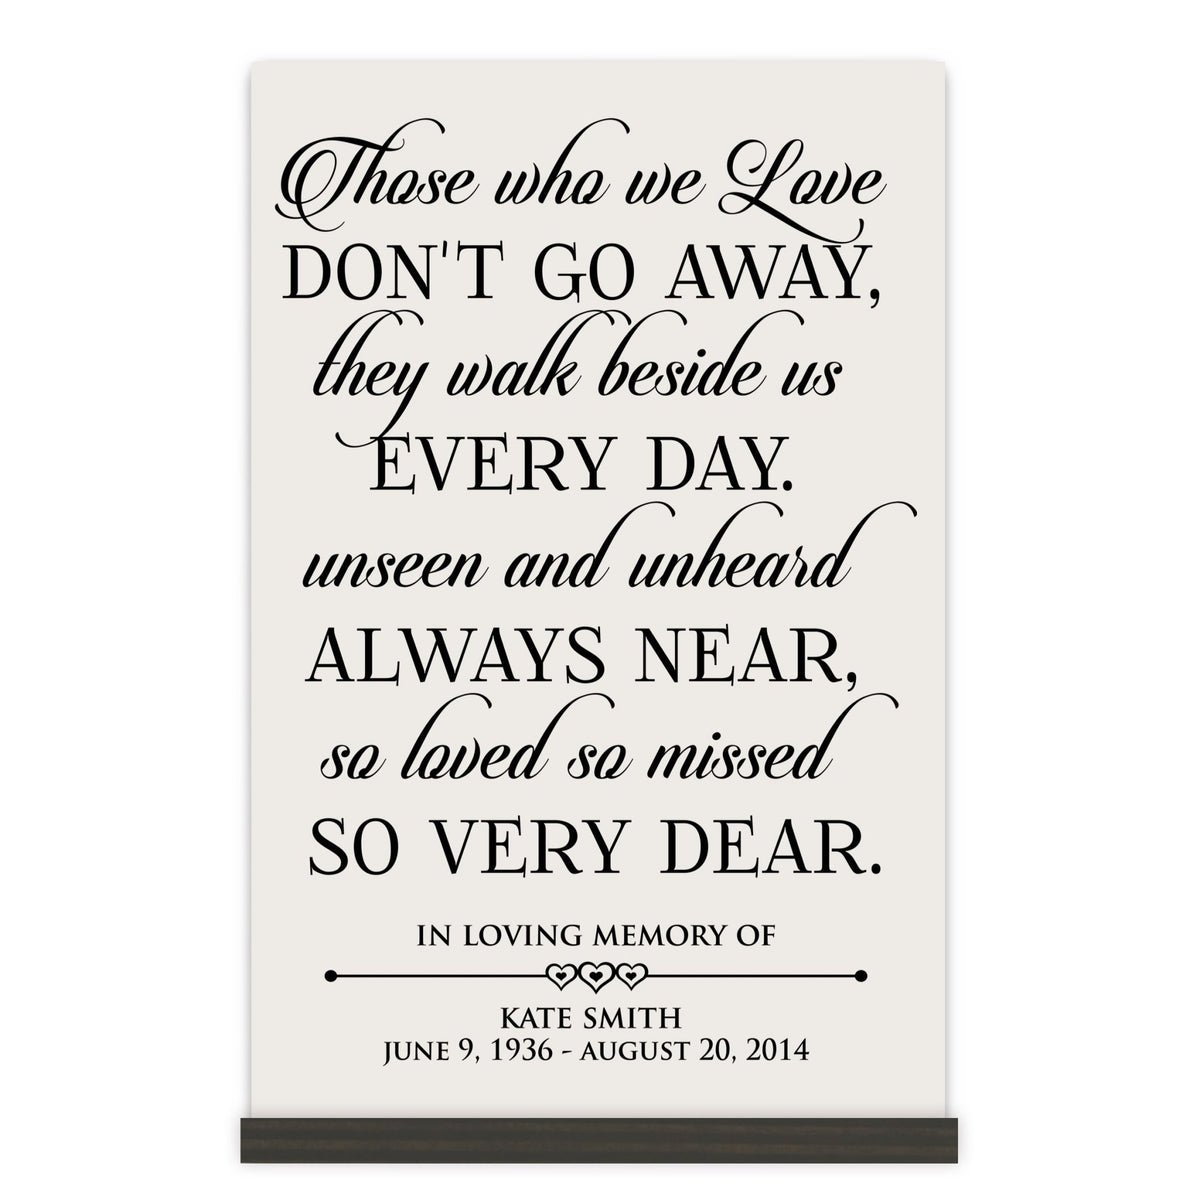 Custom Engraved Memorial Wooden Wall Plaque Those Who We Loved 8x12 - LifeSong Milestones